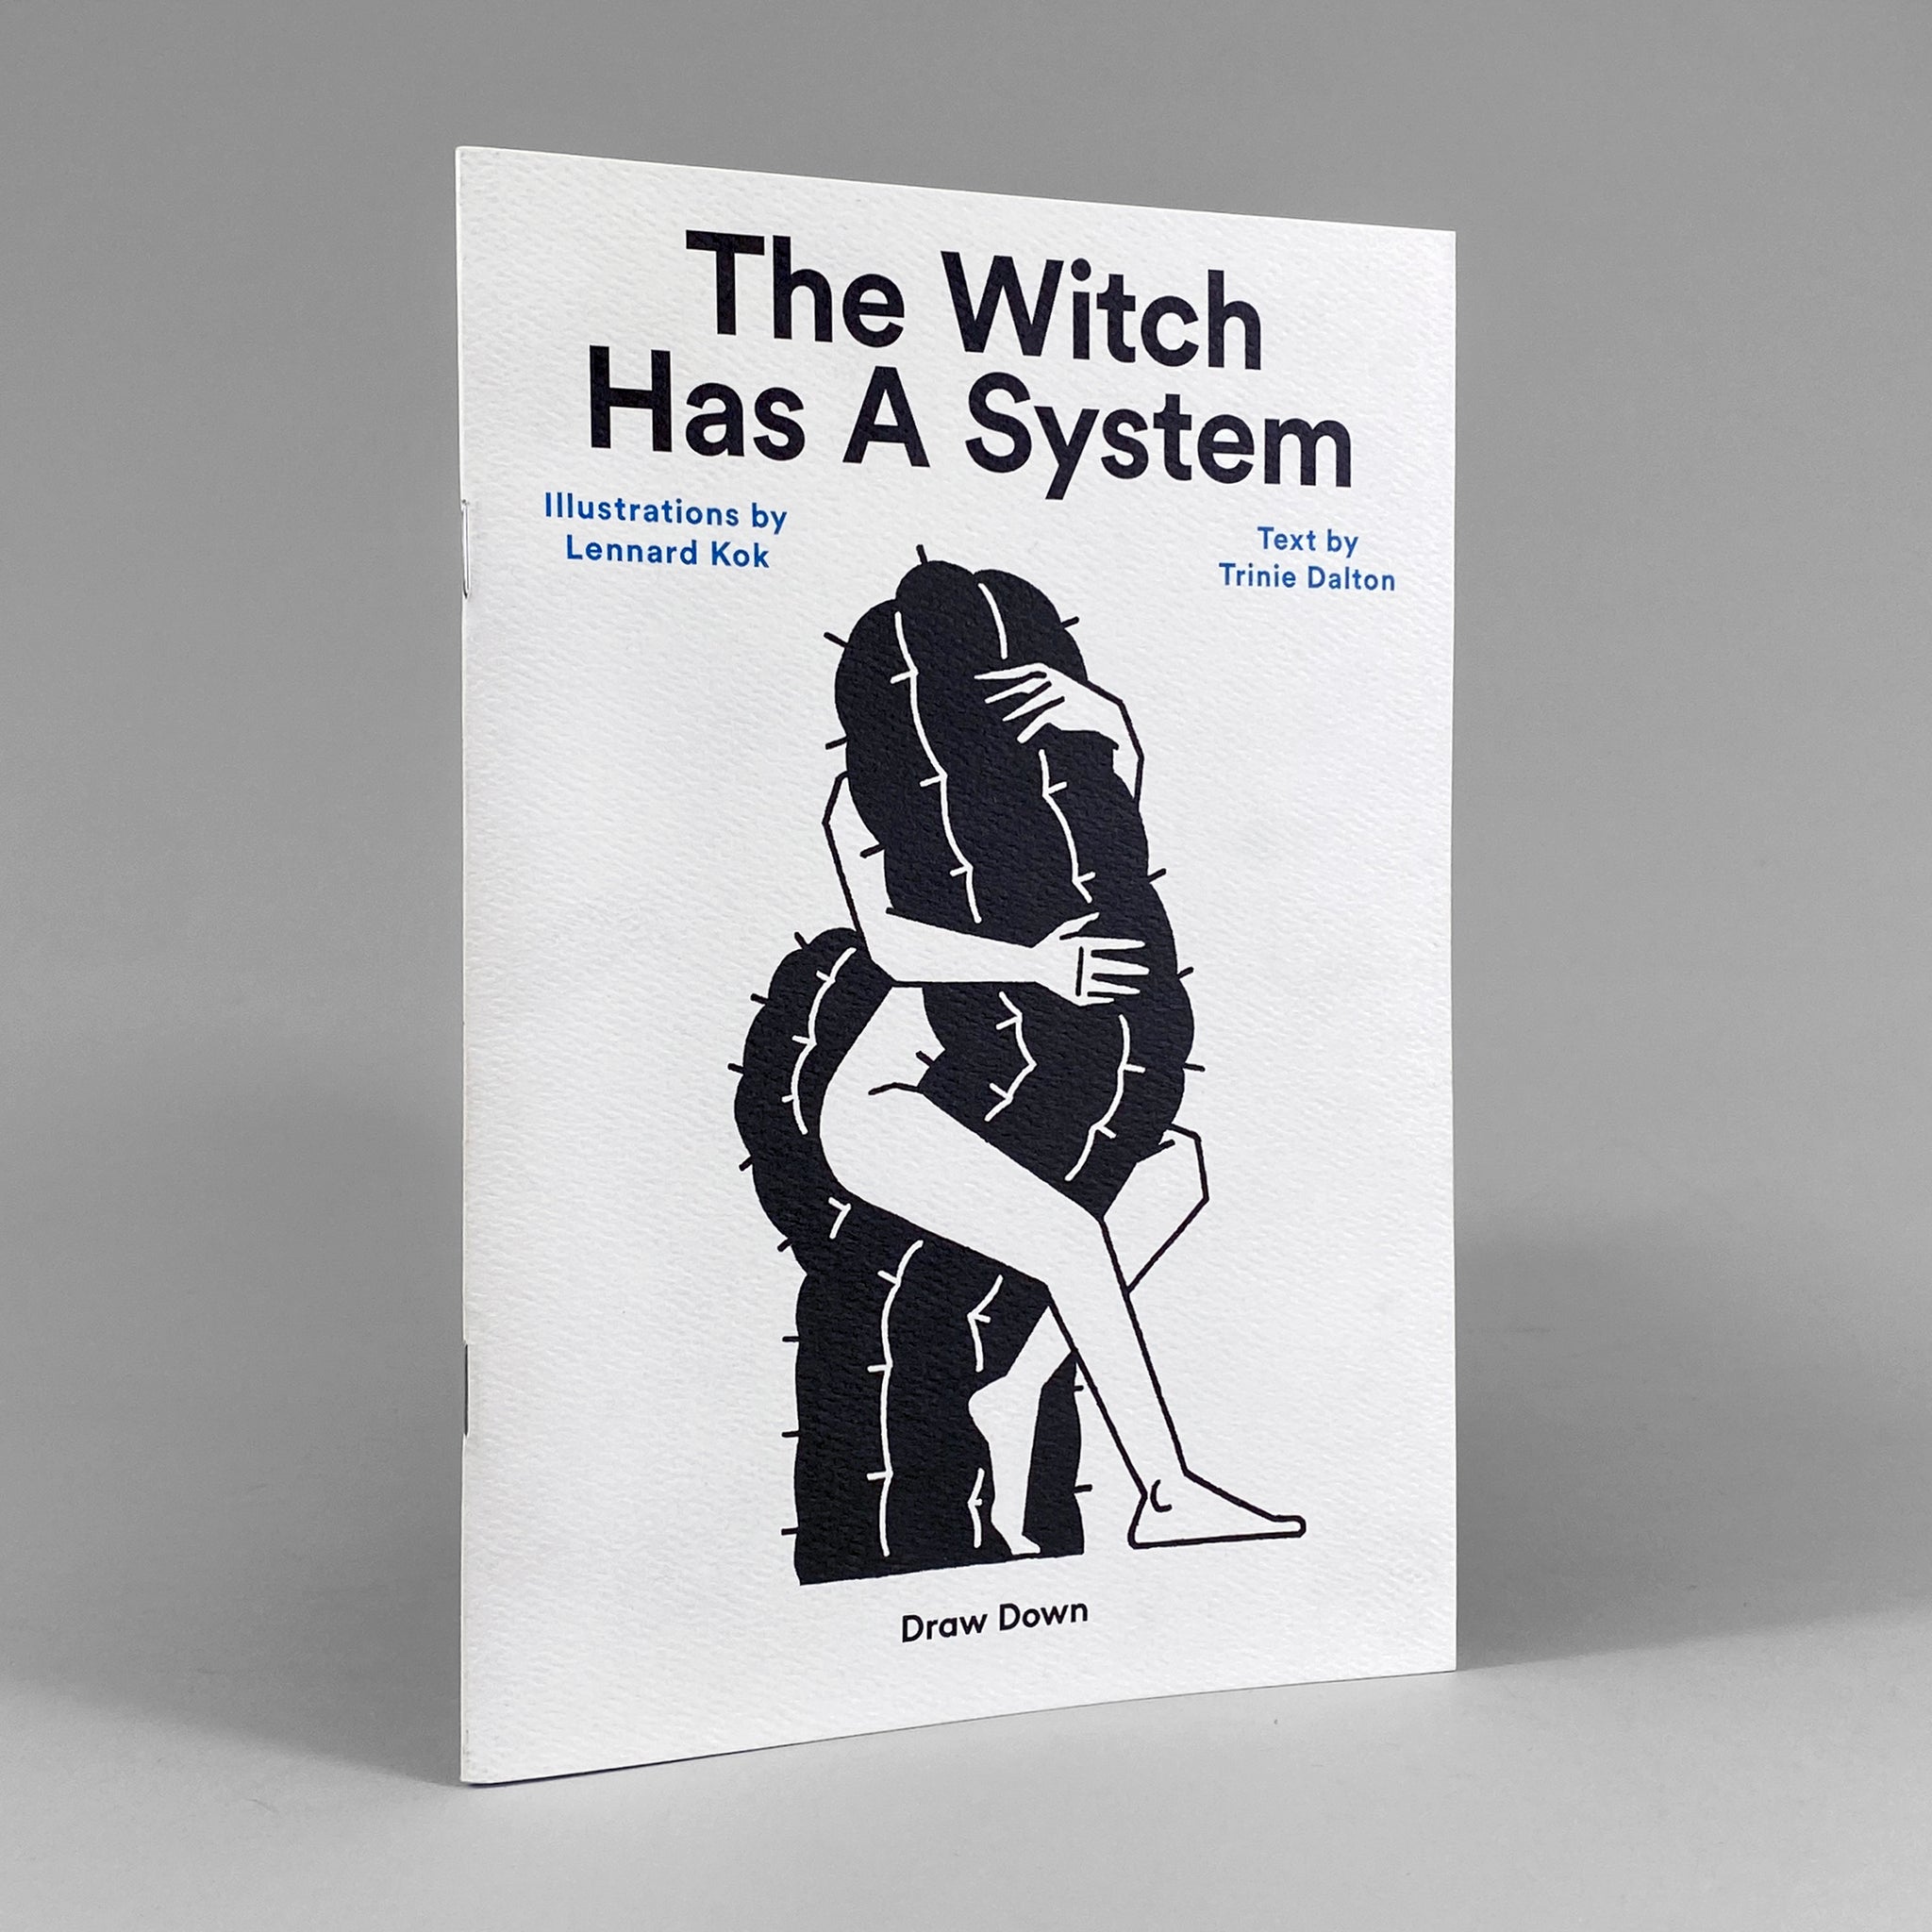 The Witch Has A System